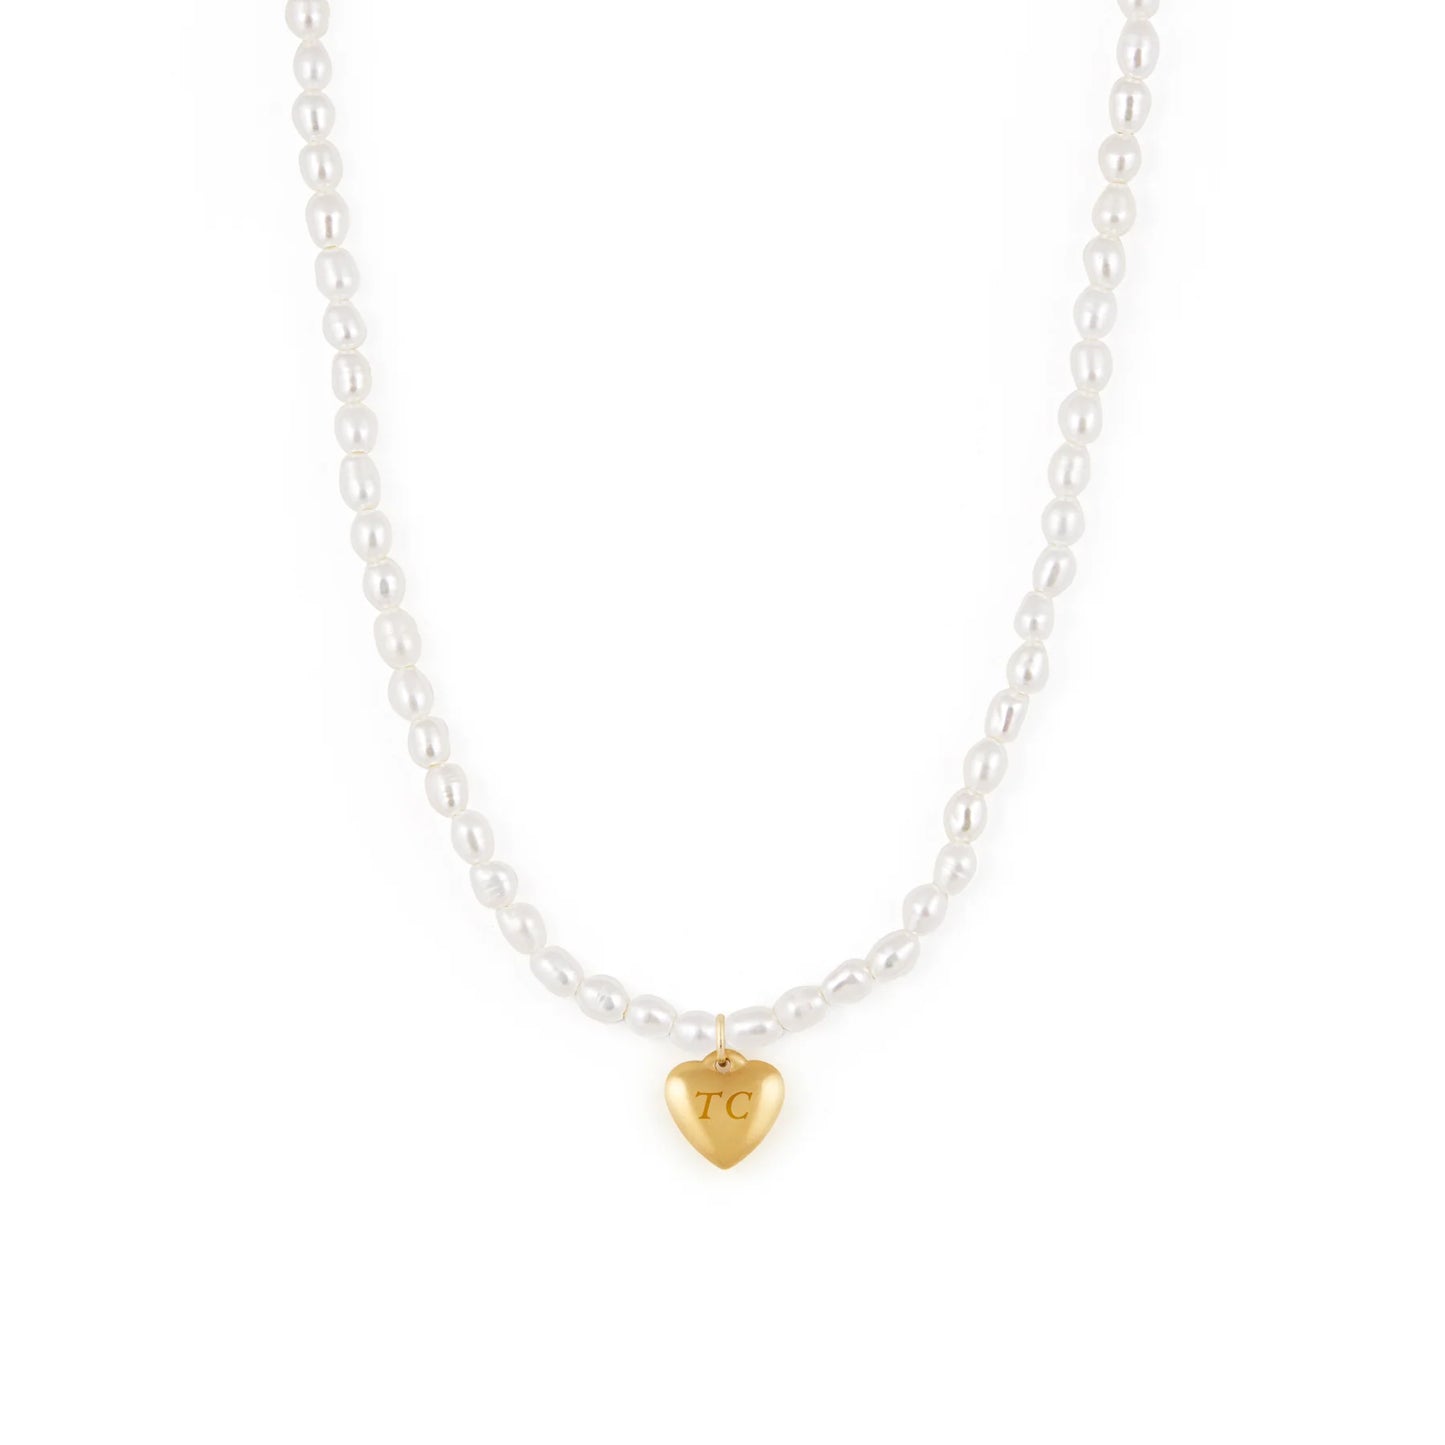 DREAM pearl necklace - gold plated